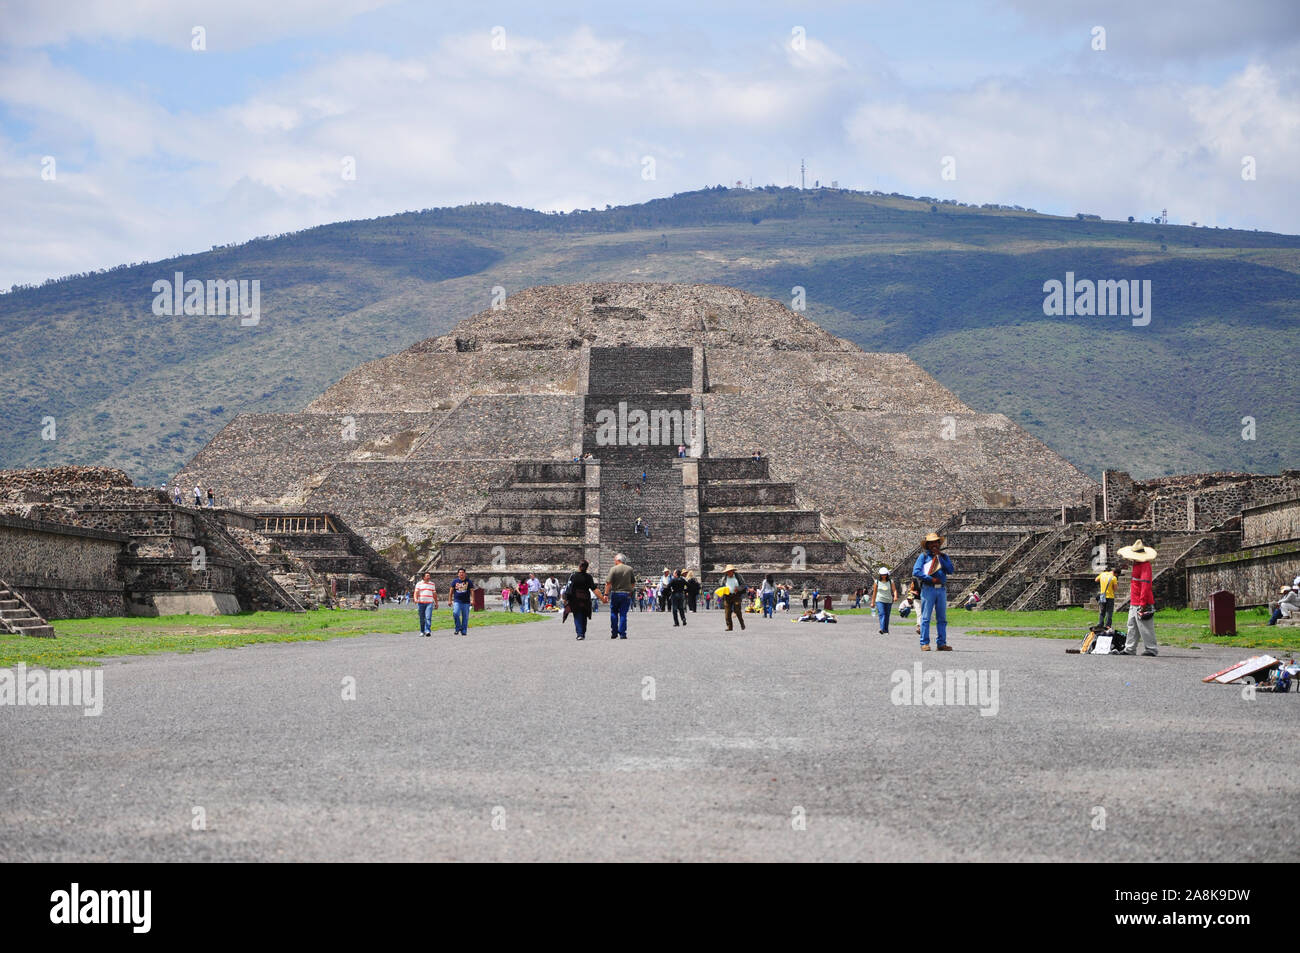 Teotihuacan,Mexico - July 06, 2011: View of the pyramid of the moon at aztec pyramid Teotihuacan, ancient Mesoamerican city in Mexico, locat Stock Photo